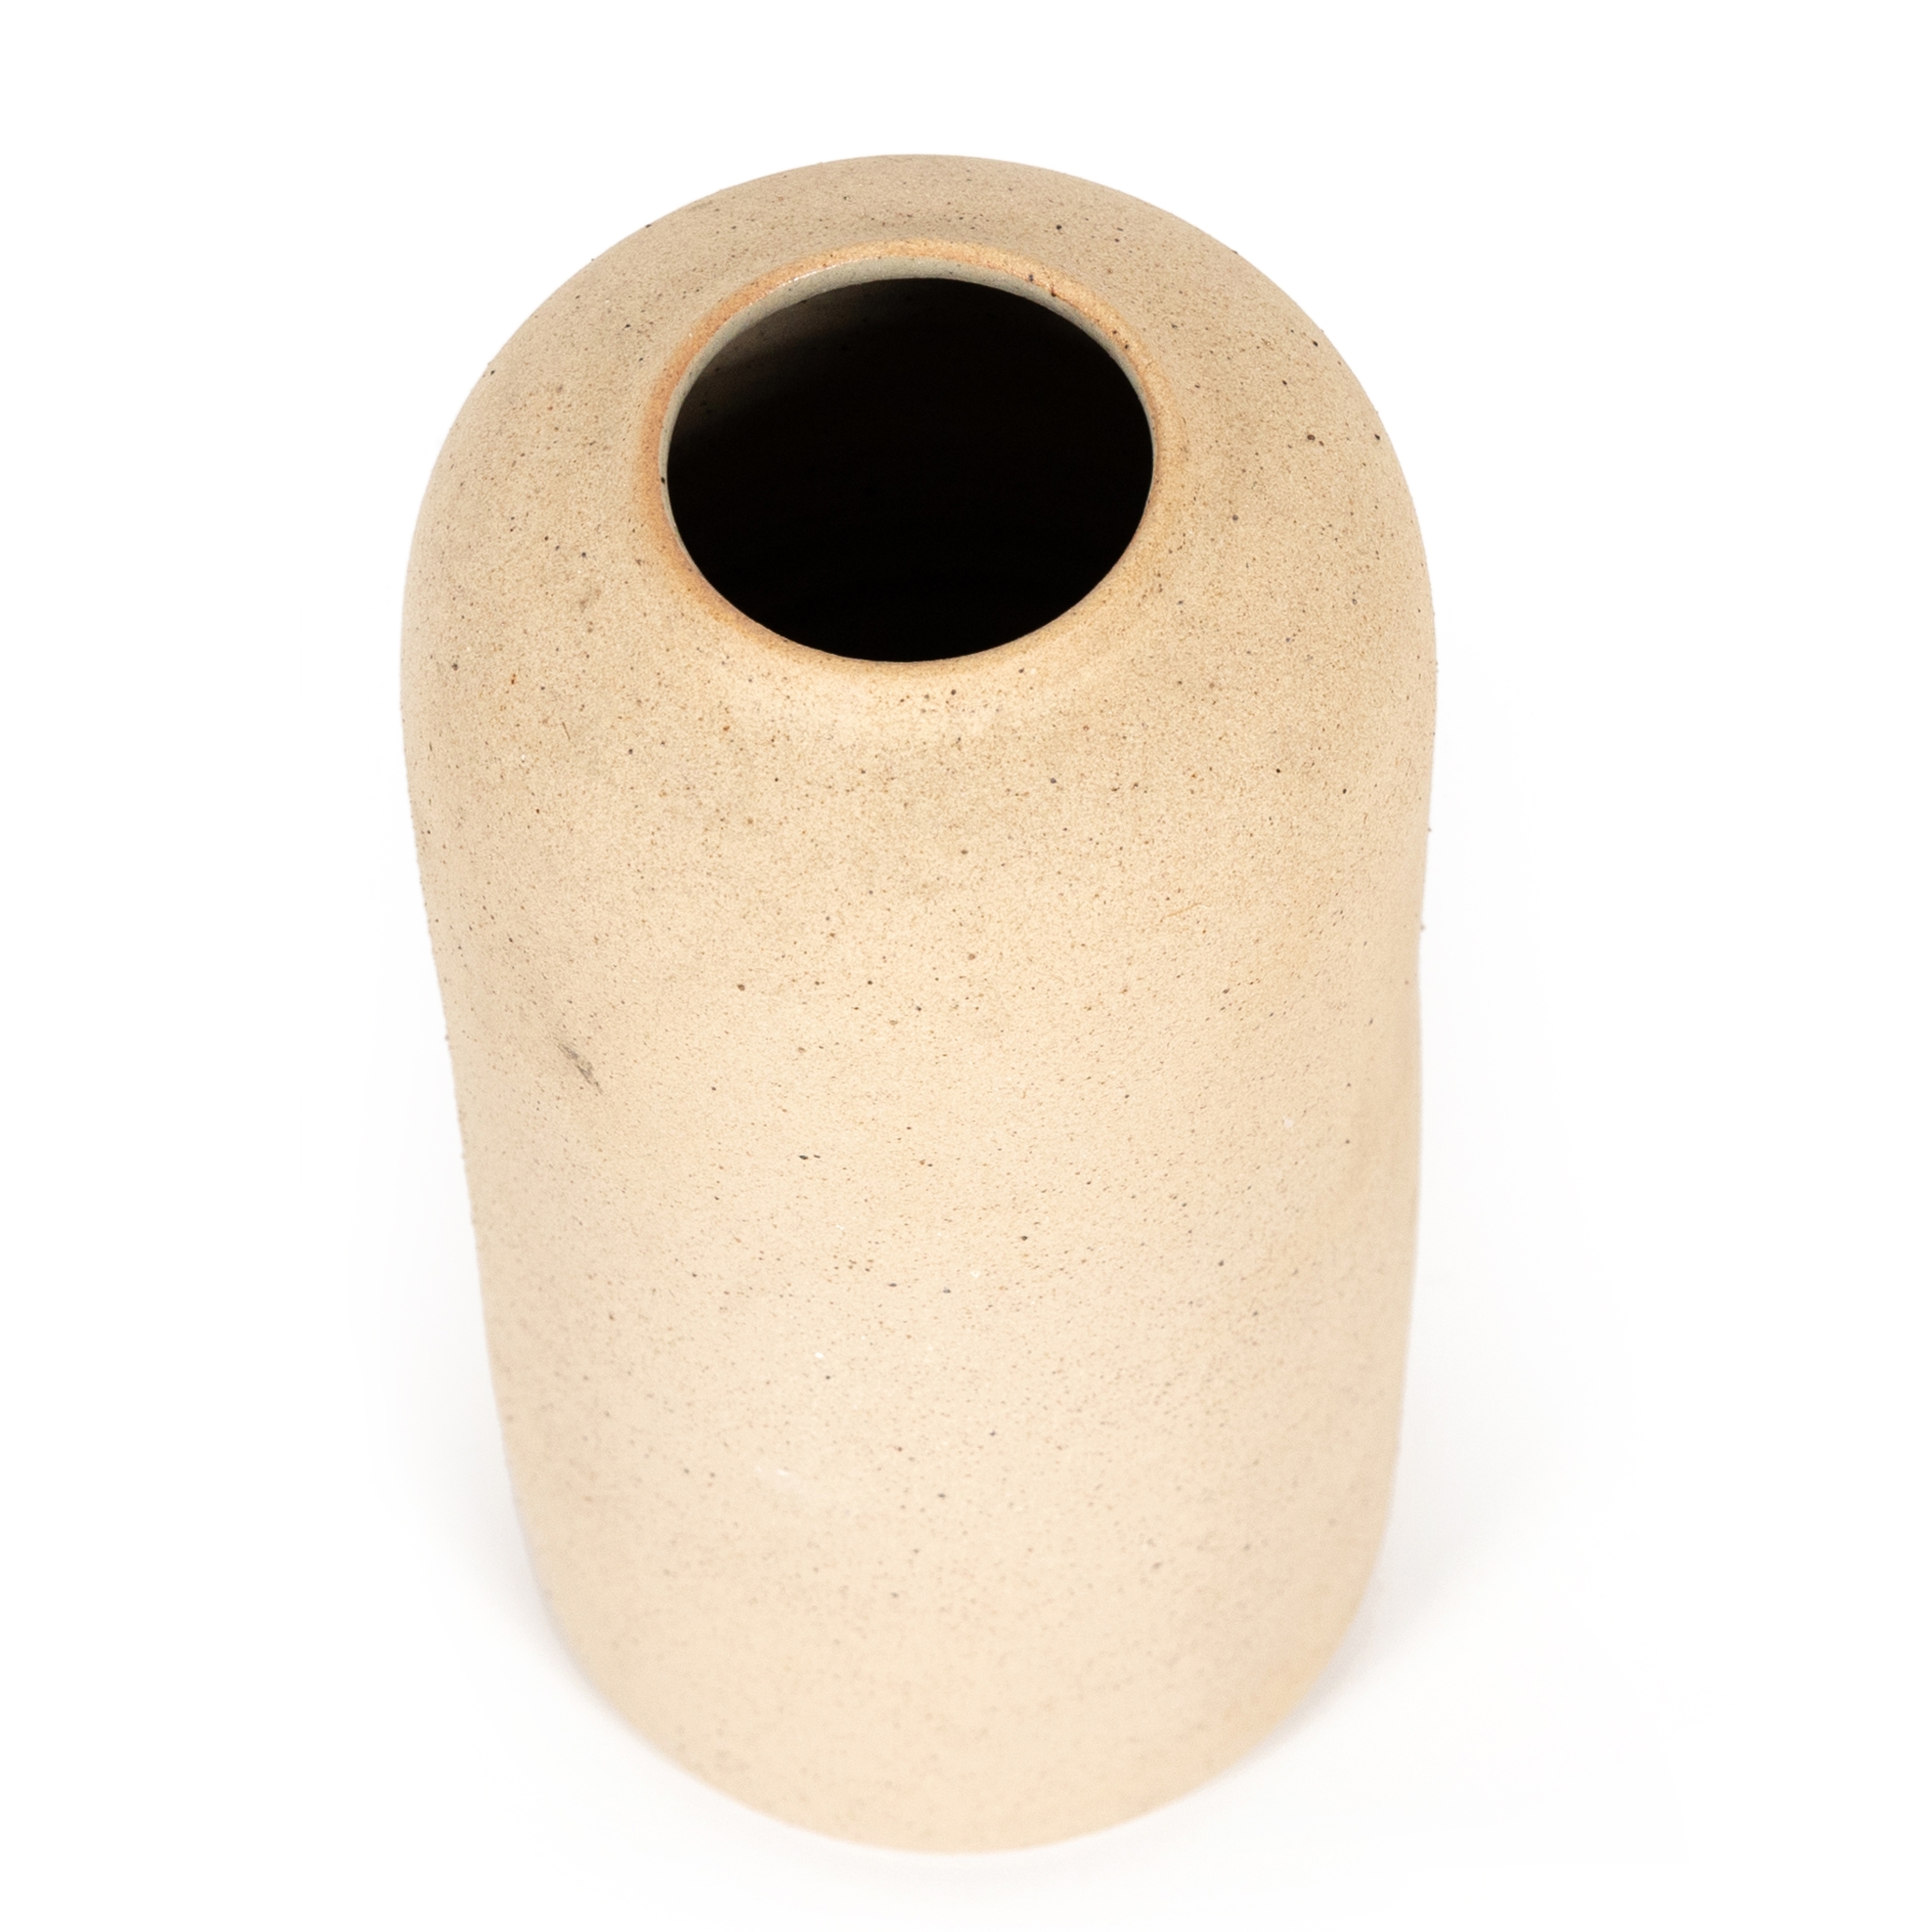 Evalia Tall Vase-Natural Speckled Clay - Image 4